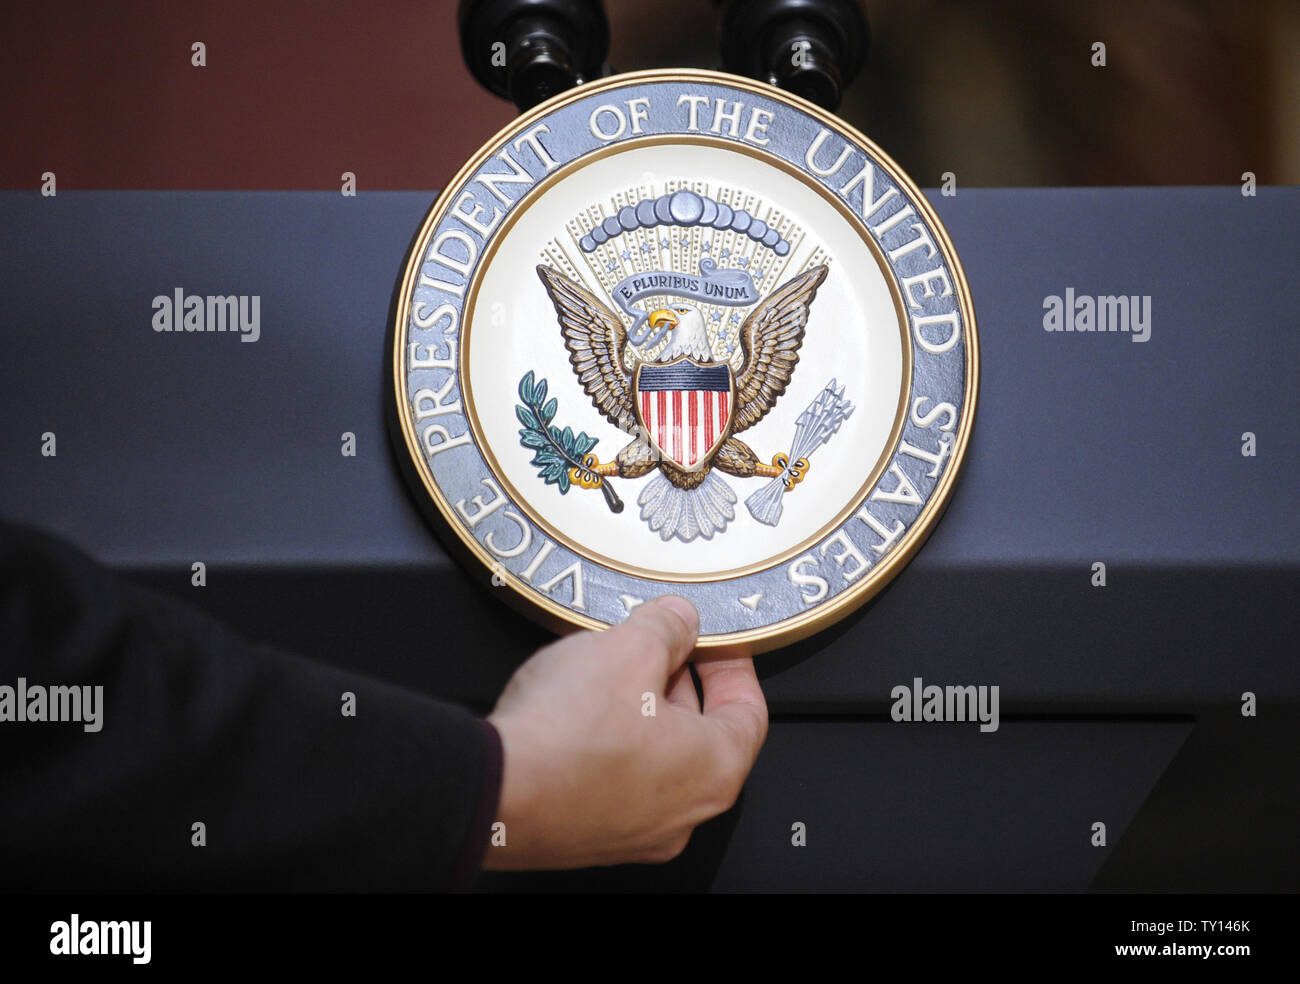 The seal of the Vice President of the United States is placed on the podium as Vice President Joe Biden tours the Esperanza Community Housing site in Los Angeles on May 15, 2009. (UPI Photo/ Phil McCarten) Stock Photo